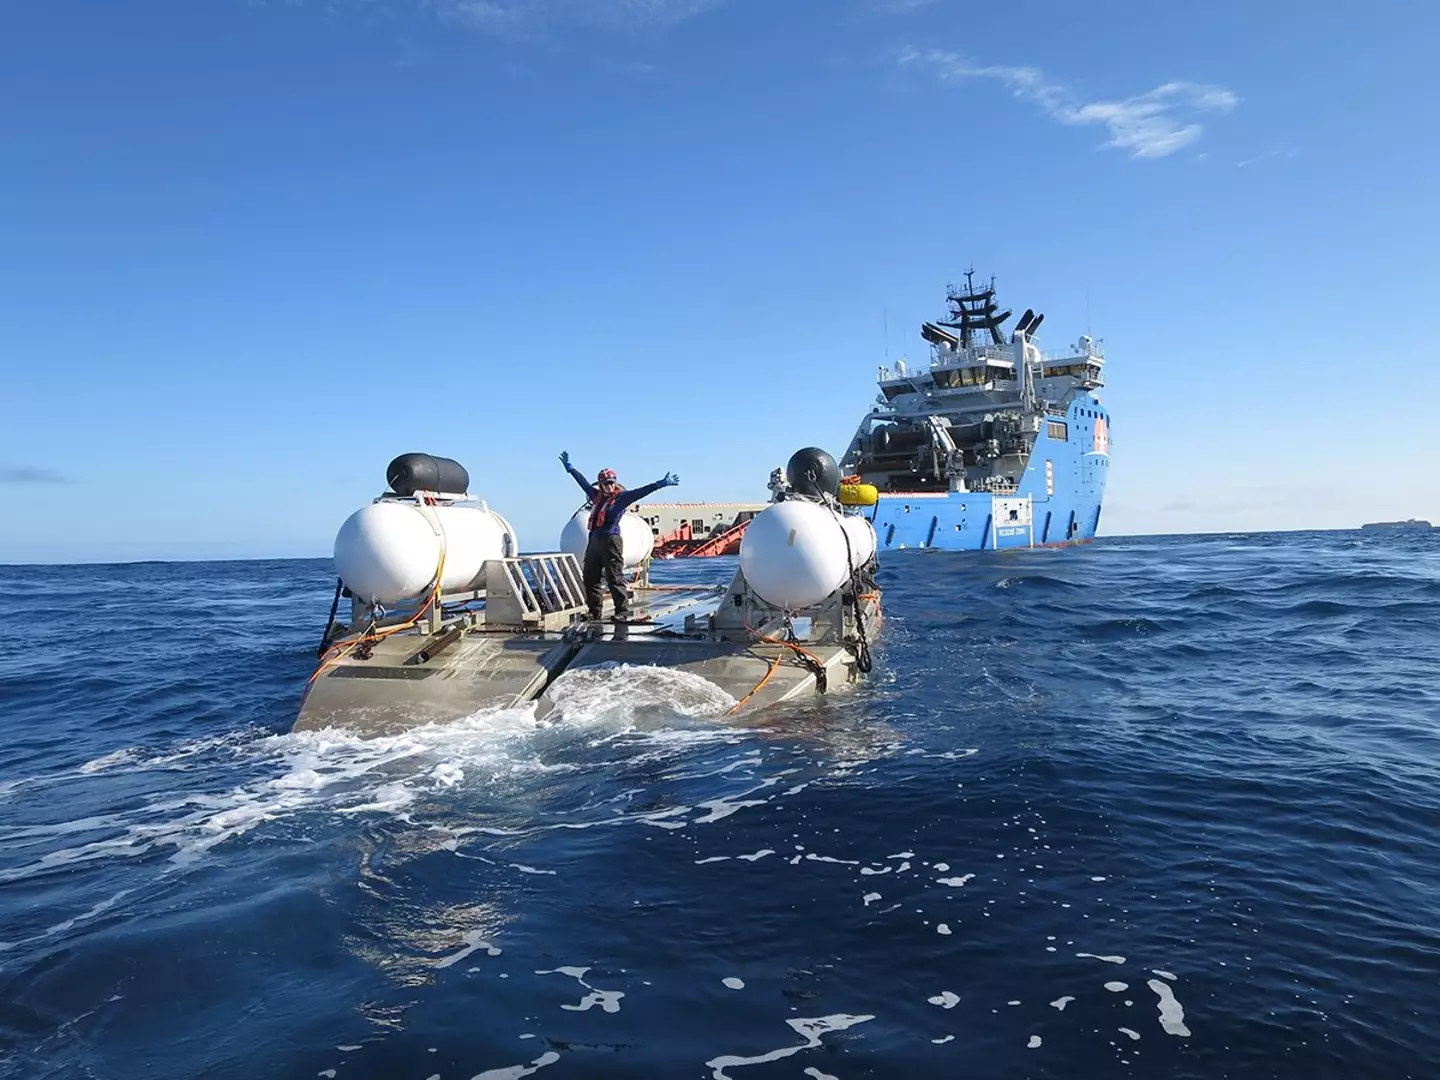 The OceanGate submersible before it set off.